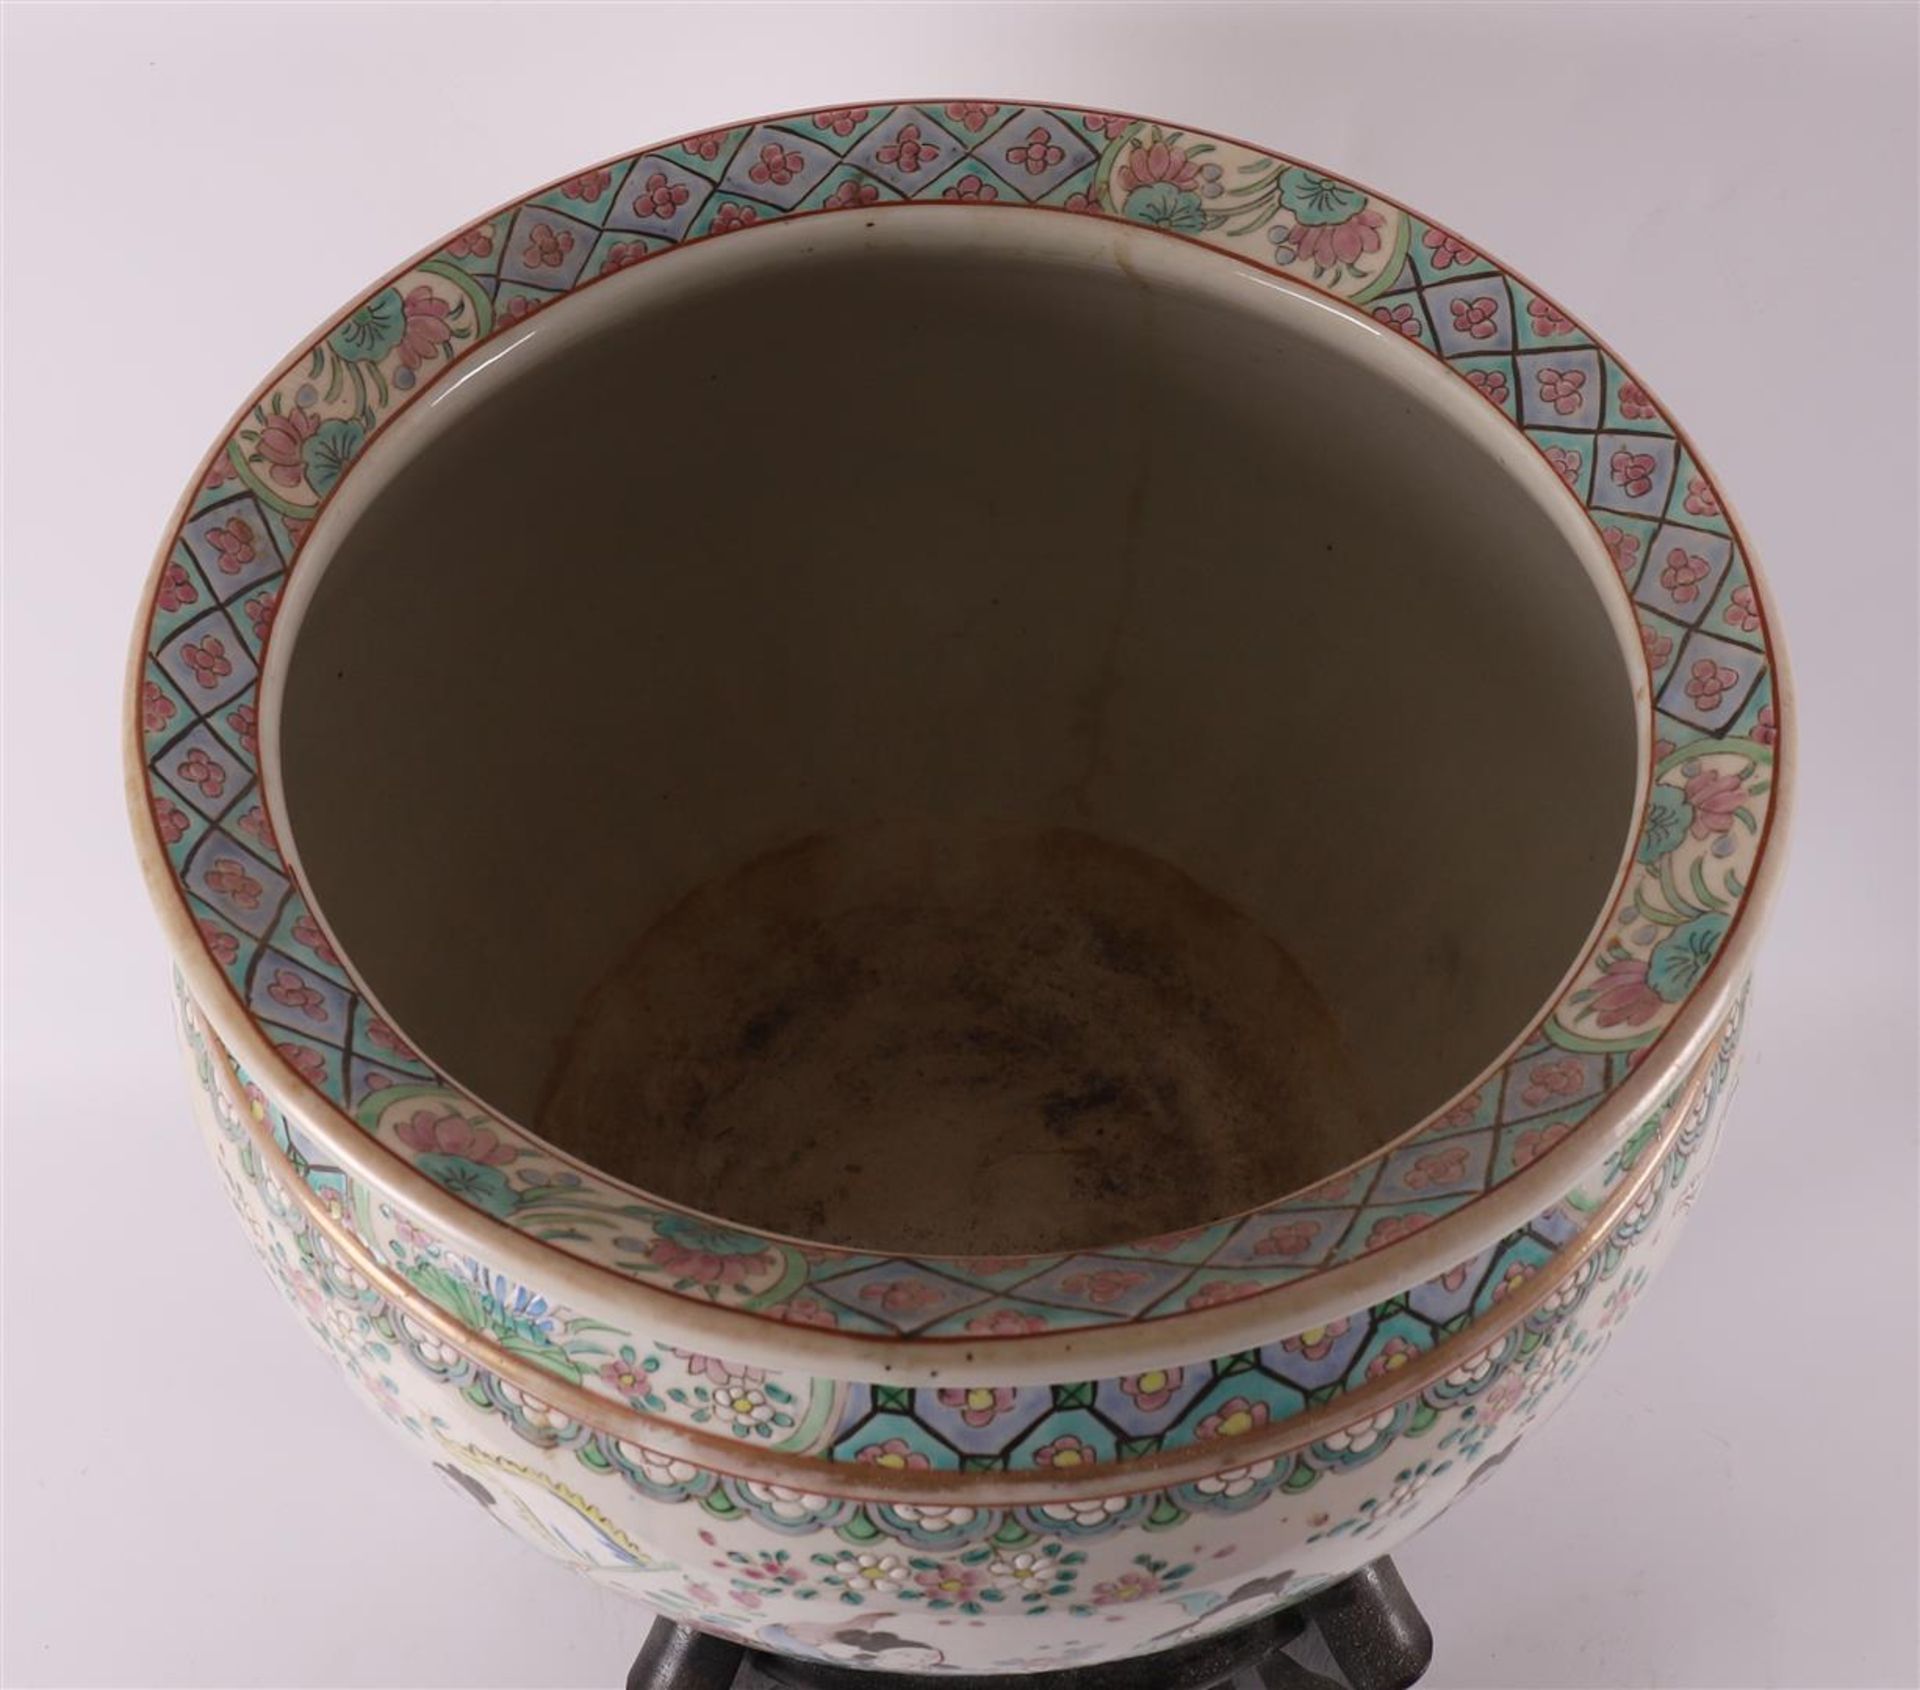 A porcelain cachepot or fishbowl on a loose wooden base, China, 20th century. - Image 5 of 7